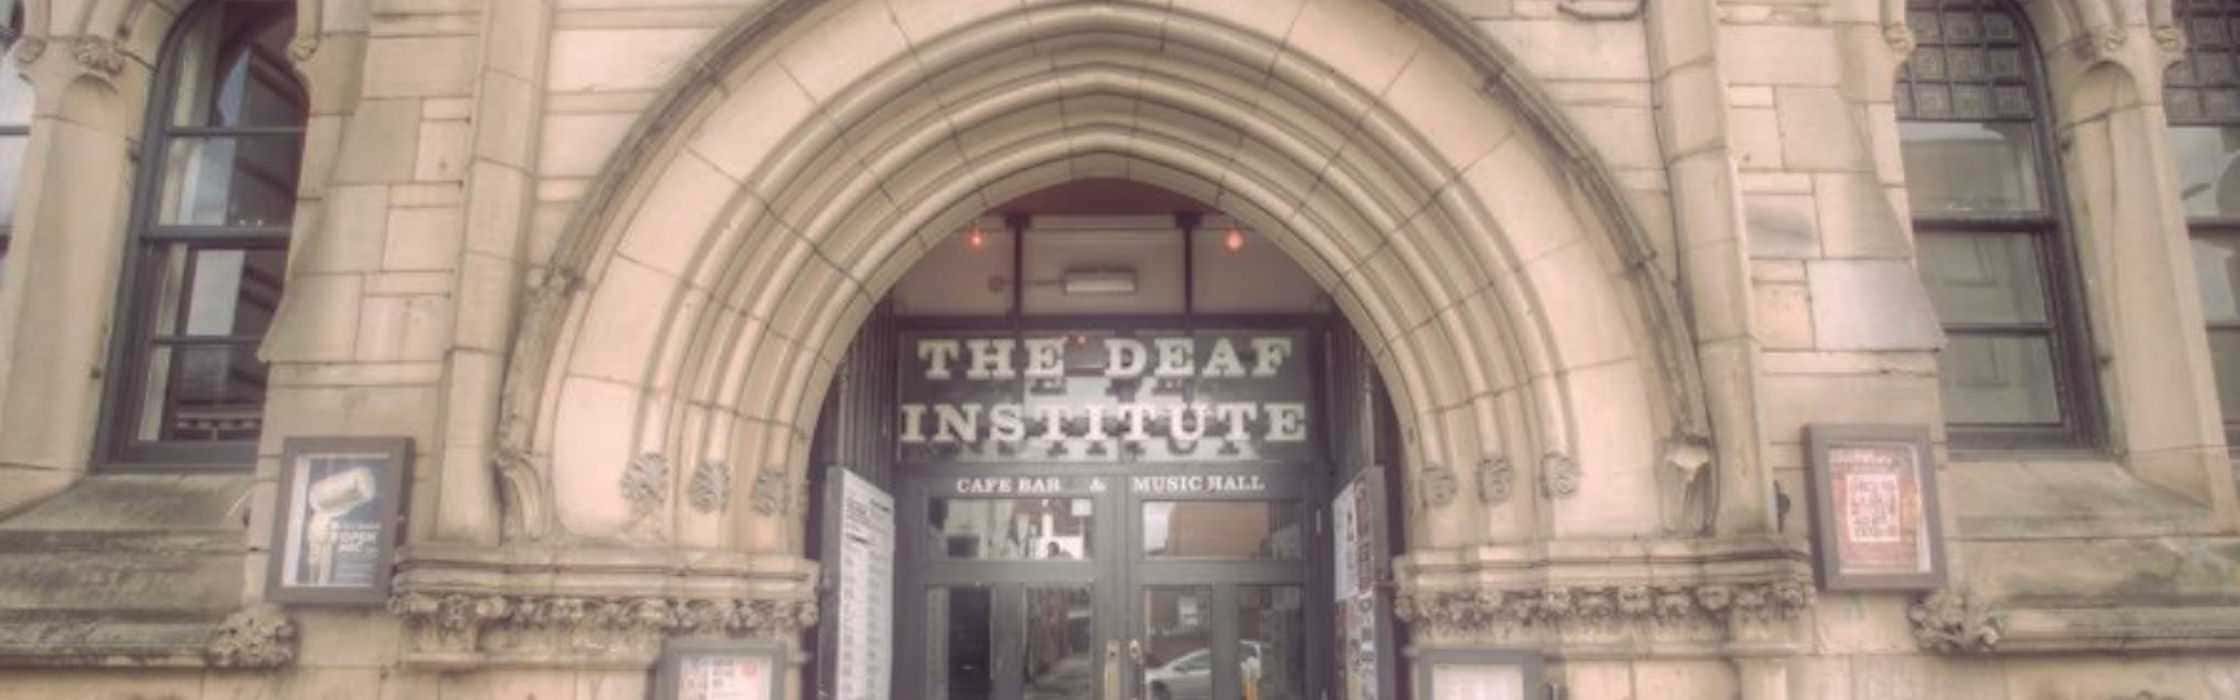 What's On at The Deaf Institute, Manchester